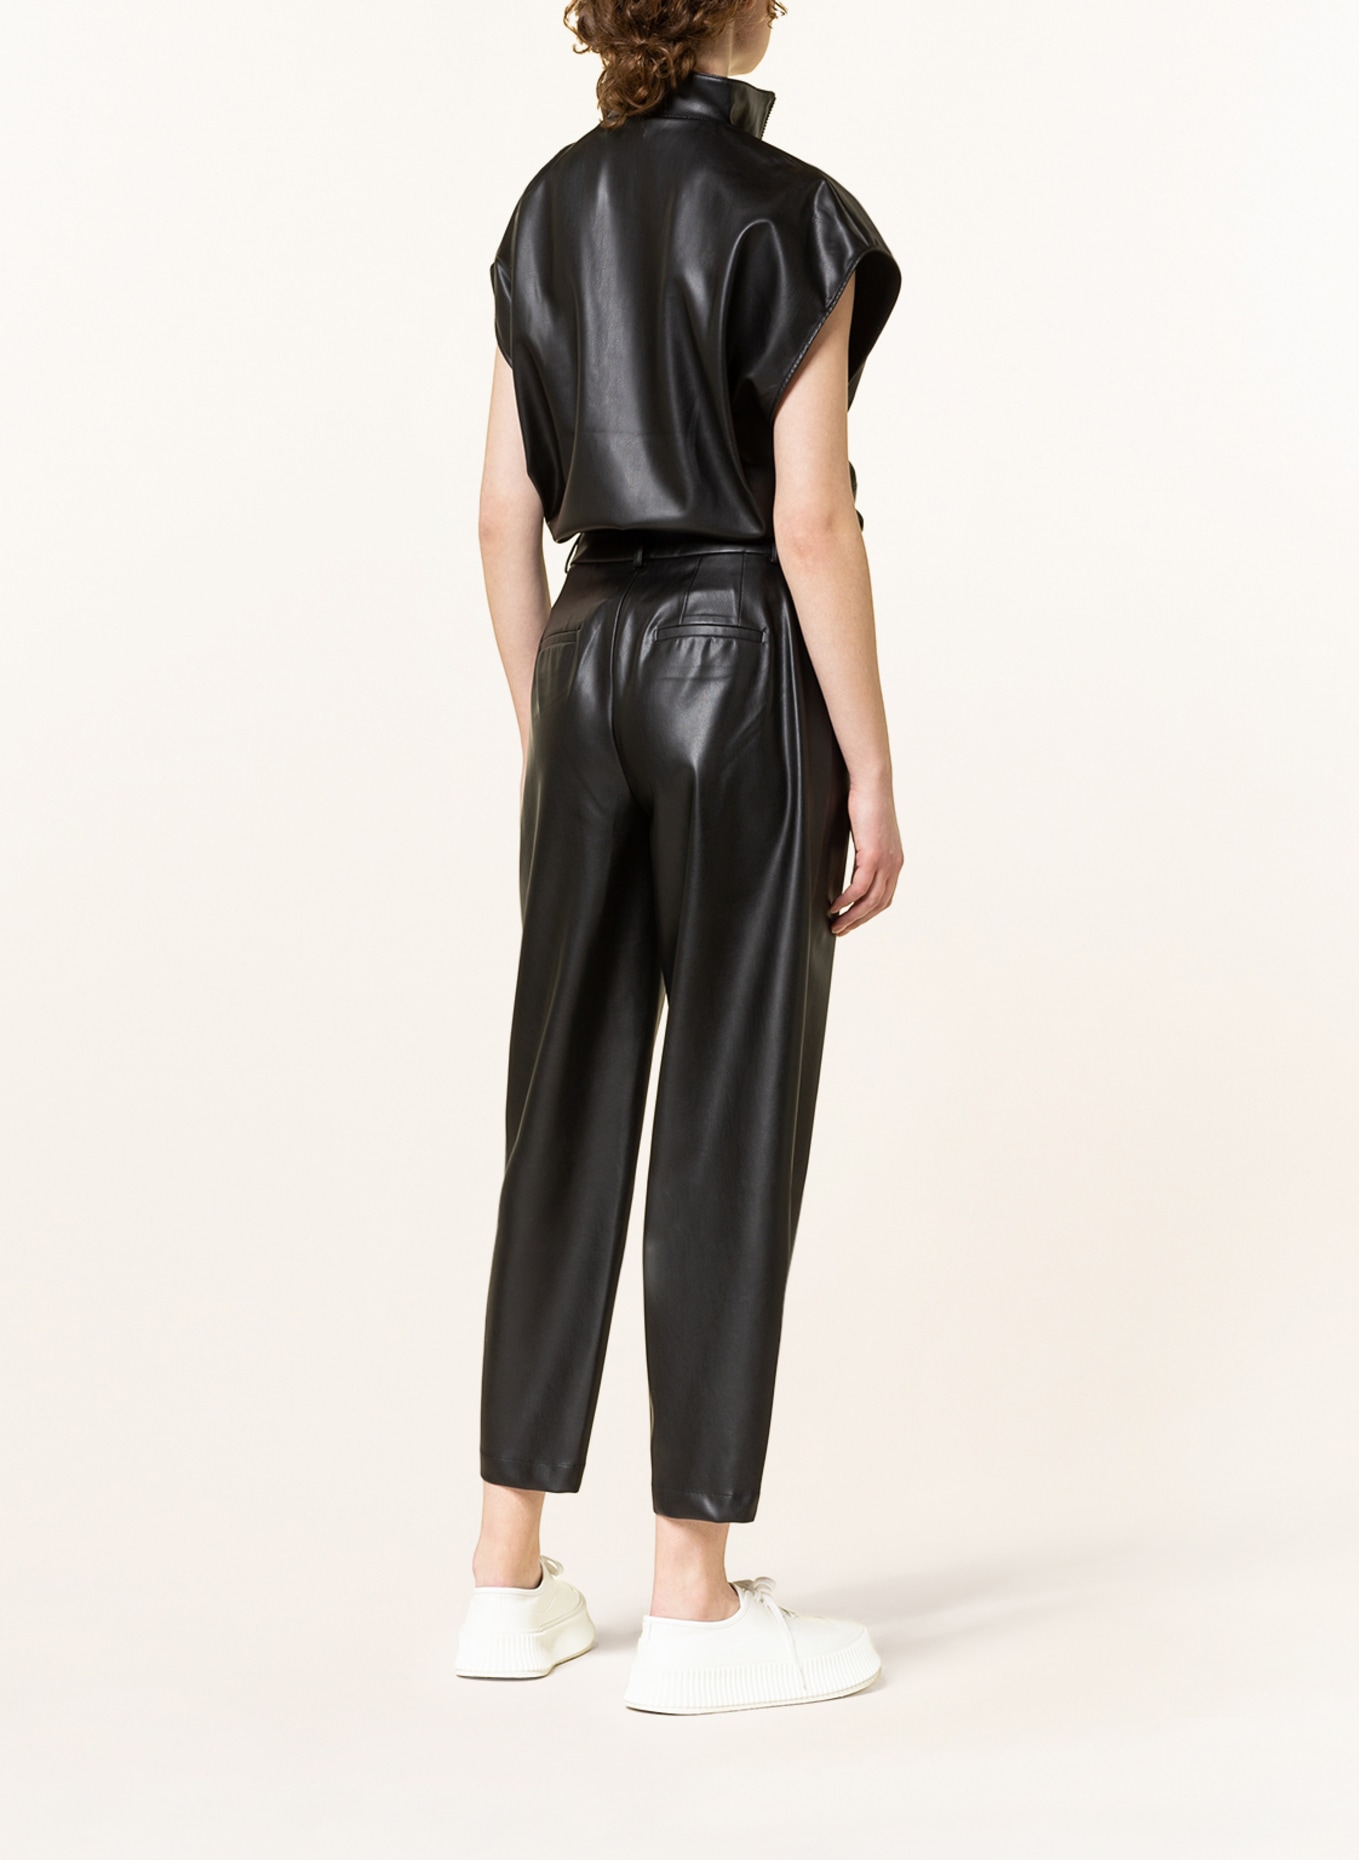 KARO KAUER 7/8 trousers in leather look, Color: BLACK (Image 3)